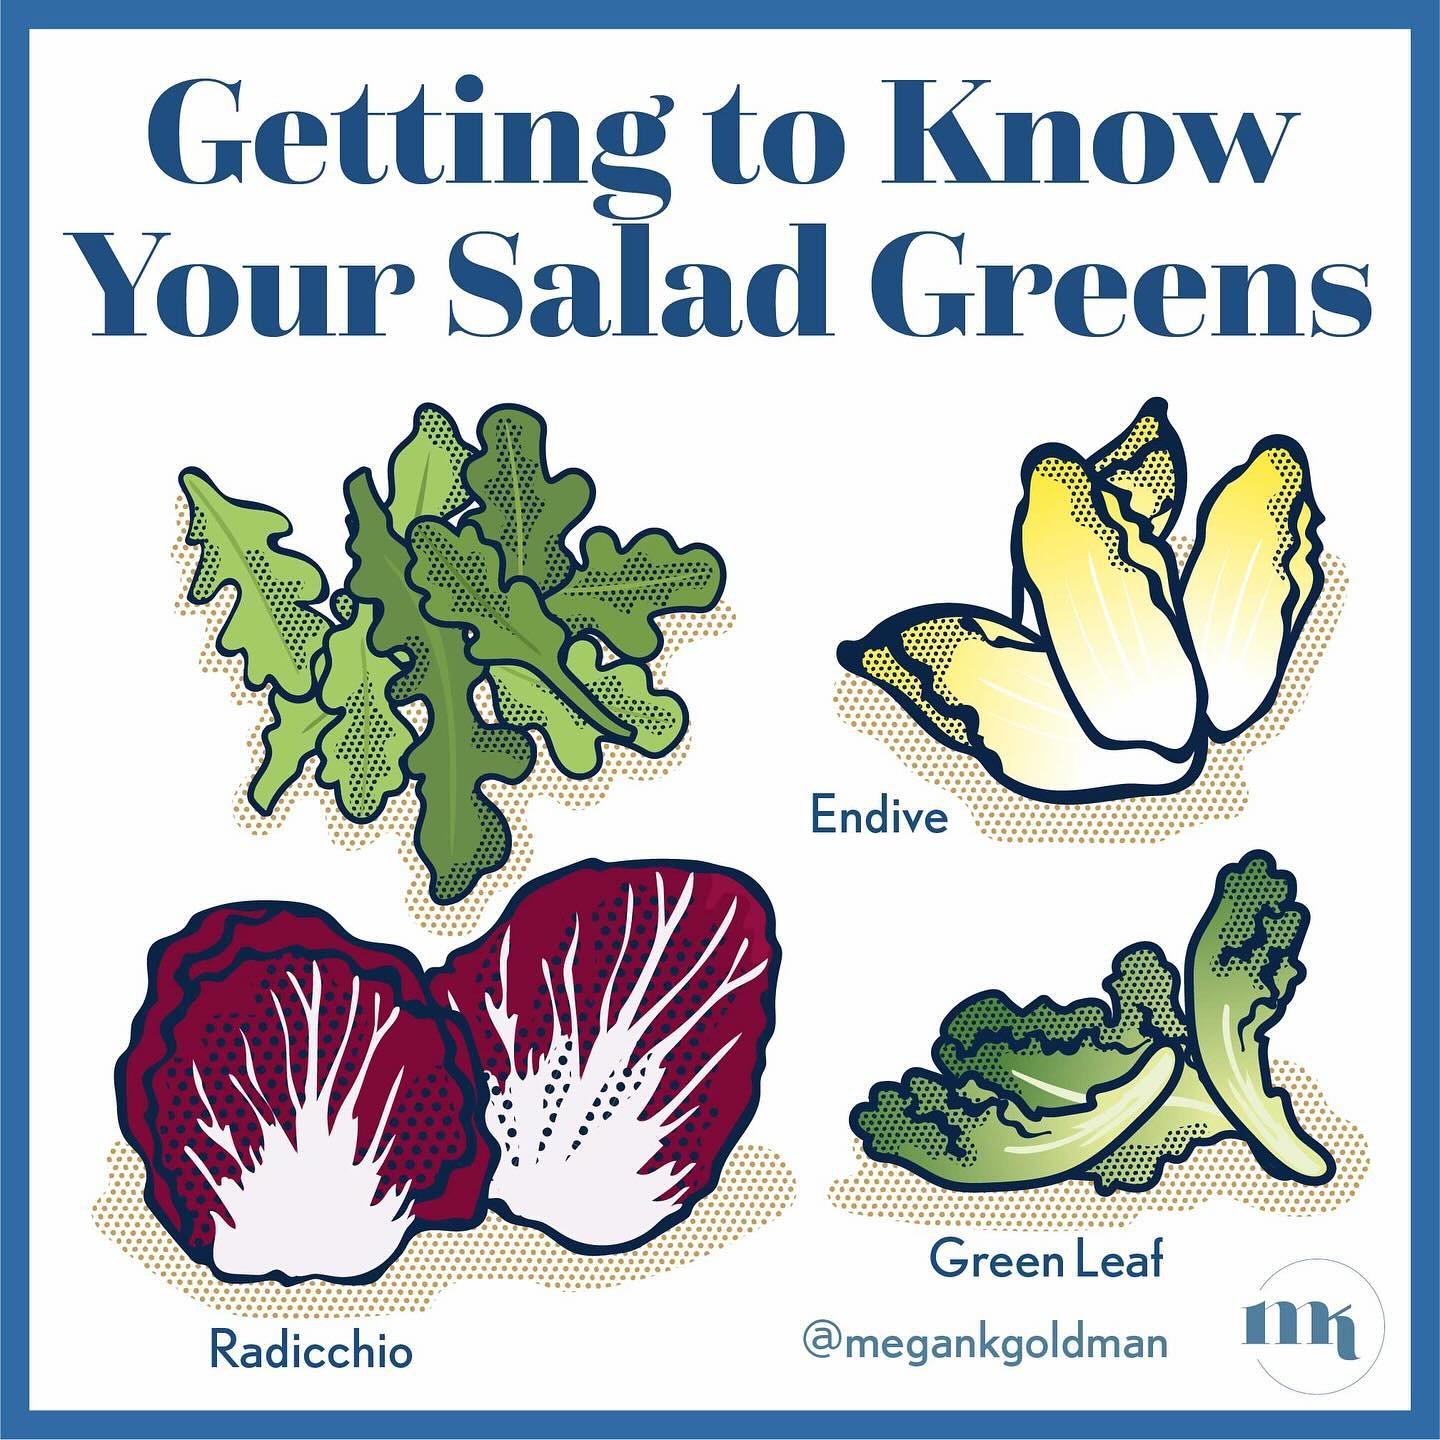 Getting to Know Your Salad Greens

Oh the sun is shining here in New York City &amp; boy-o-boy do I love the feel of Spring on my face &amp; shoulders &amp; all things lead to freshness &amp; greens for me! 

When making salads I love using a variety